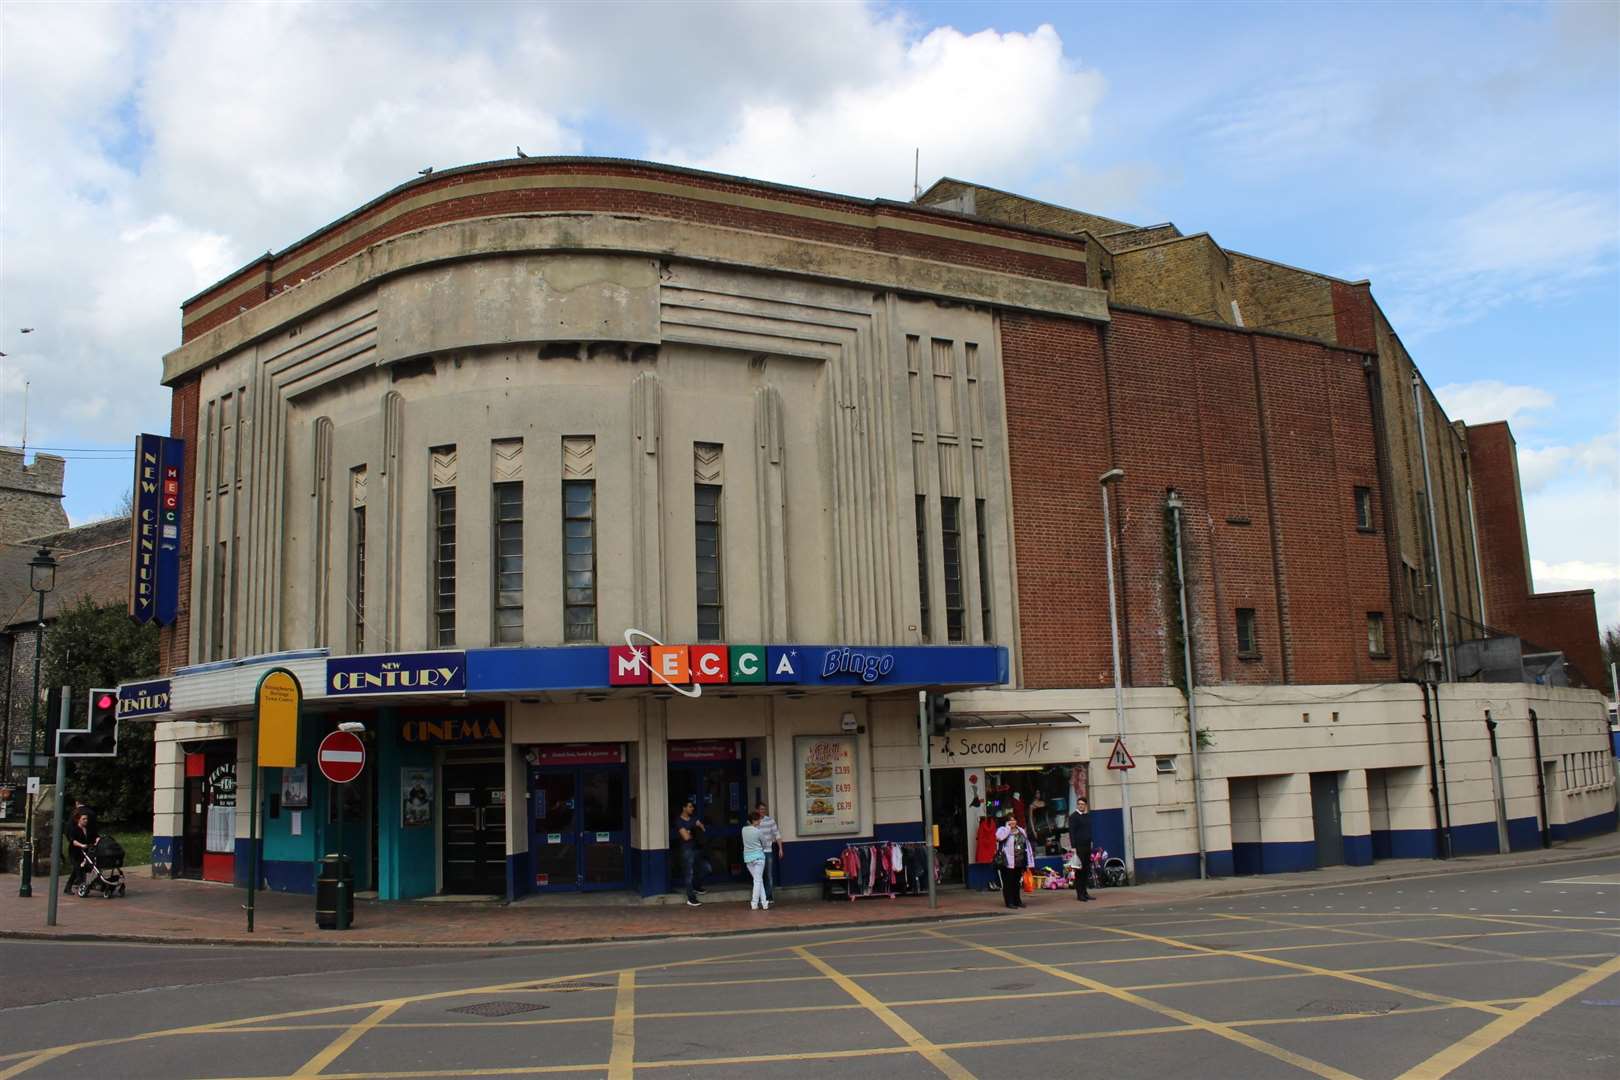 The New Century Cinema building was first opened in 1937